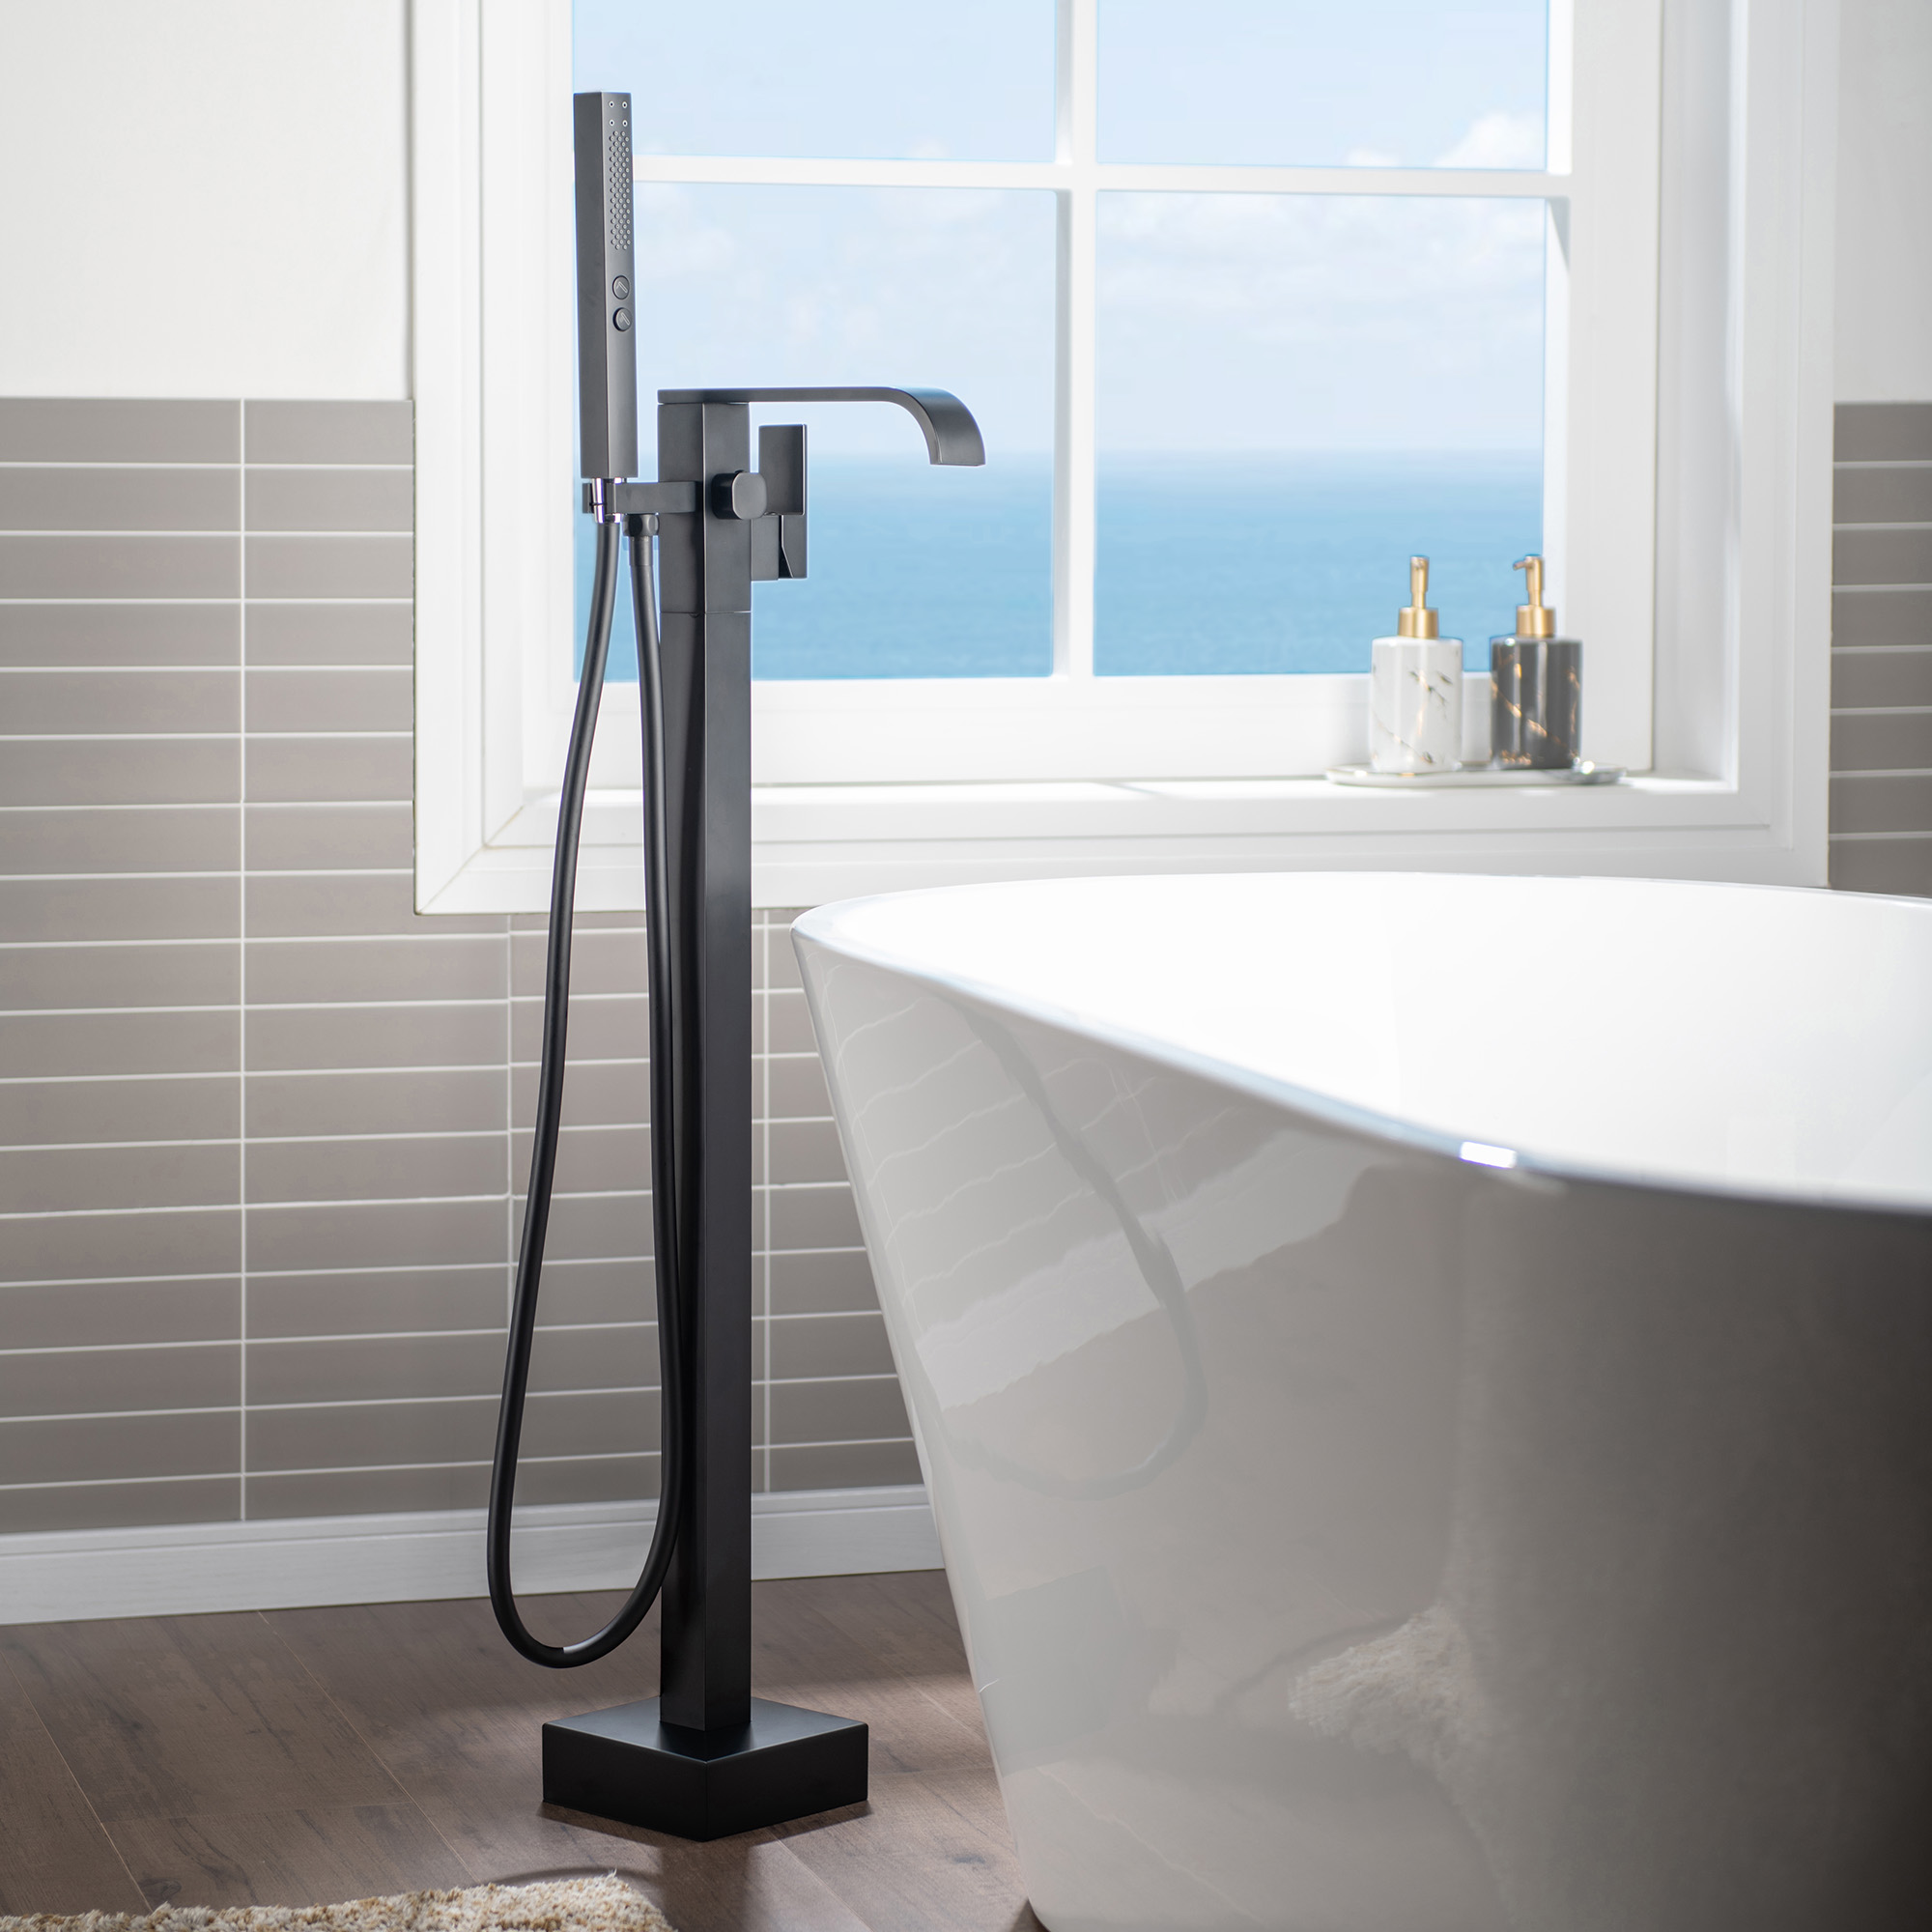  WOODBRIDGE F0037MB Contemporary Single Handle Floor Mount Freestanding Tub Filler Faucet with Hand shower in Matte Black Finish._12234